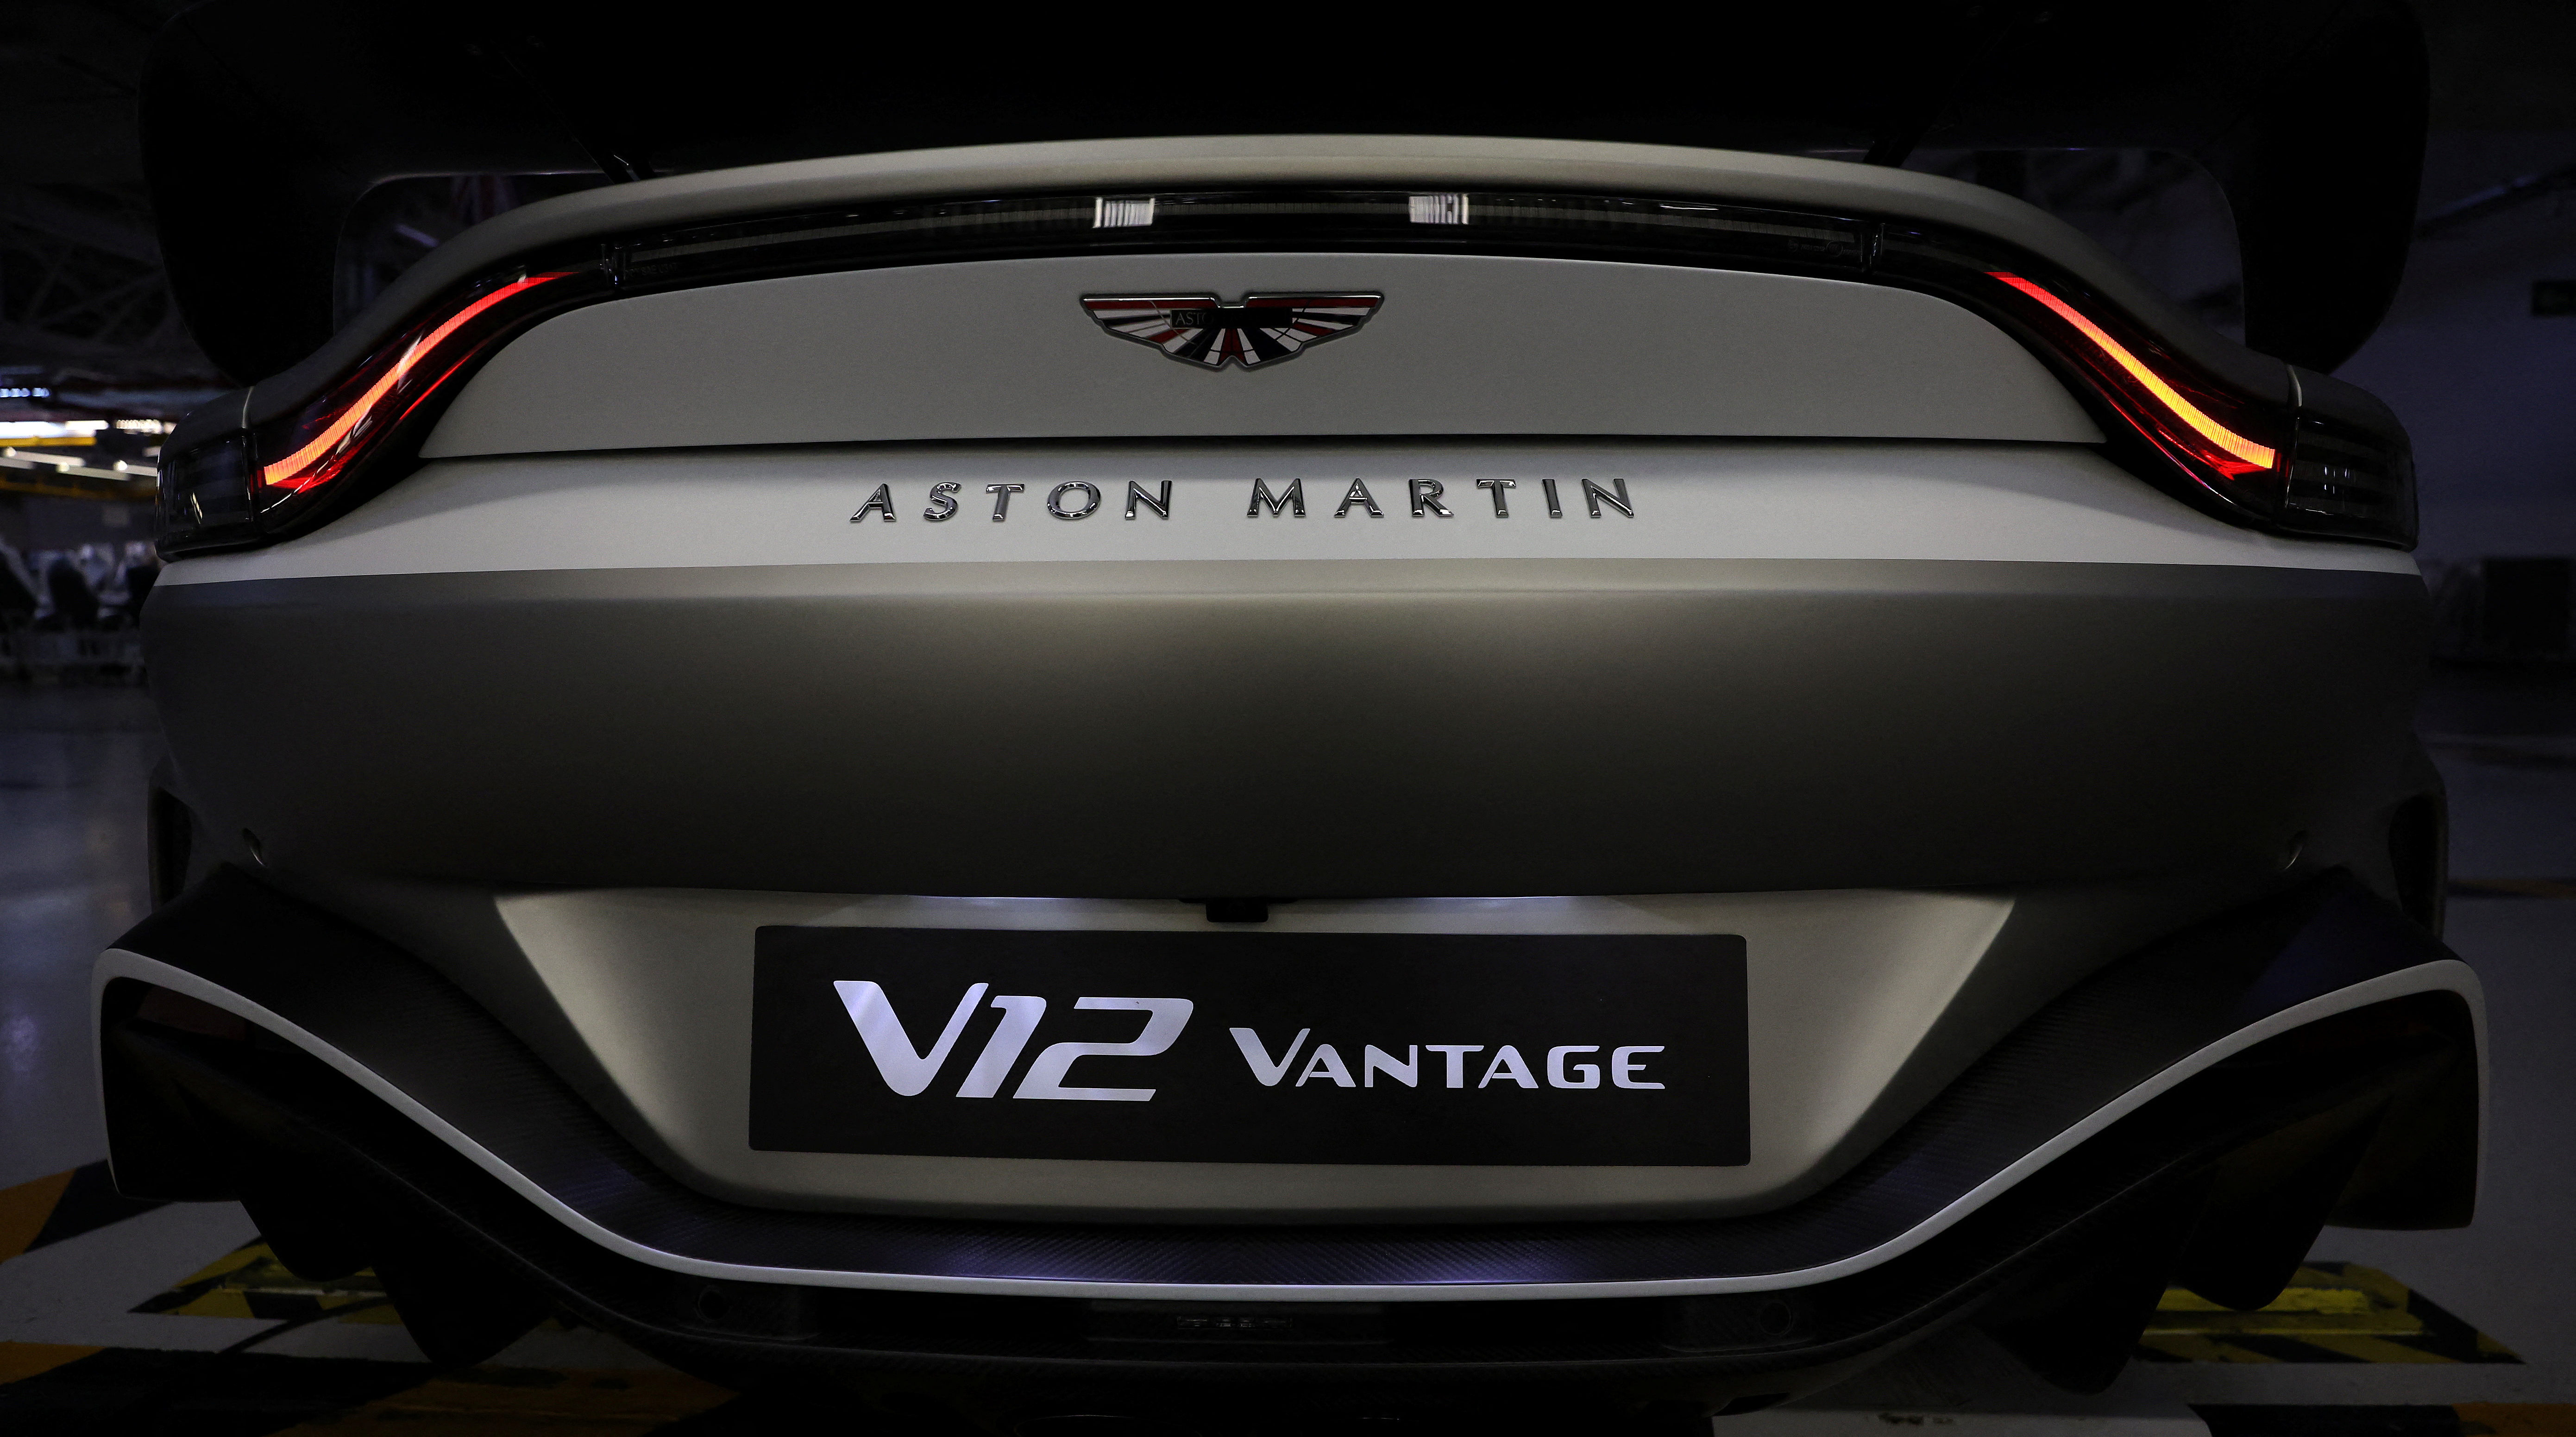 General view of the rear of the new Aston Martin V12 Vantage car at the company’s factory in Gaydon